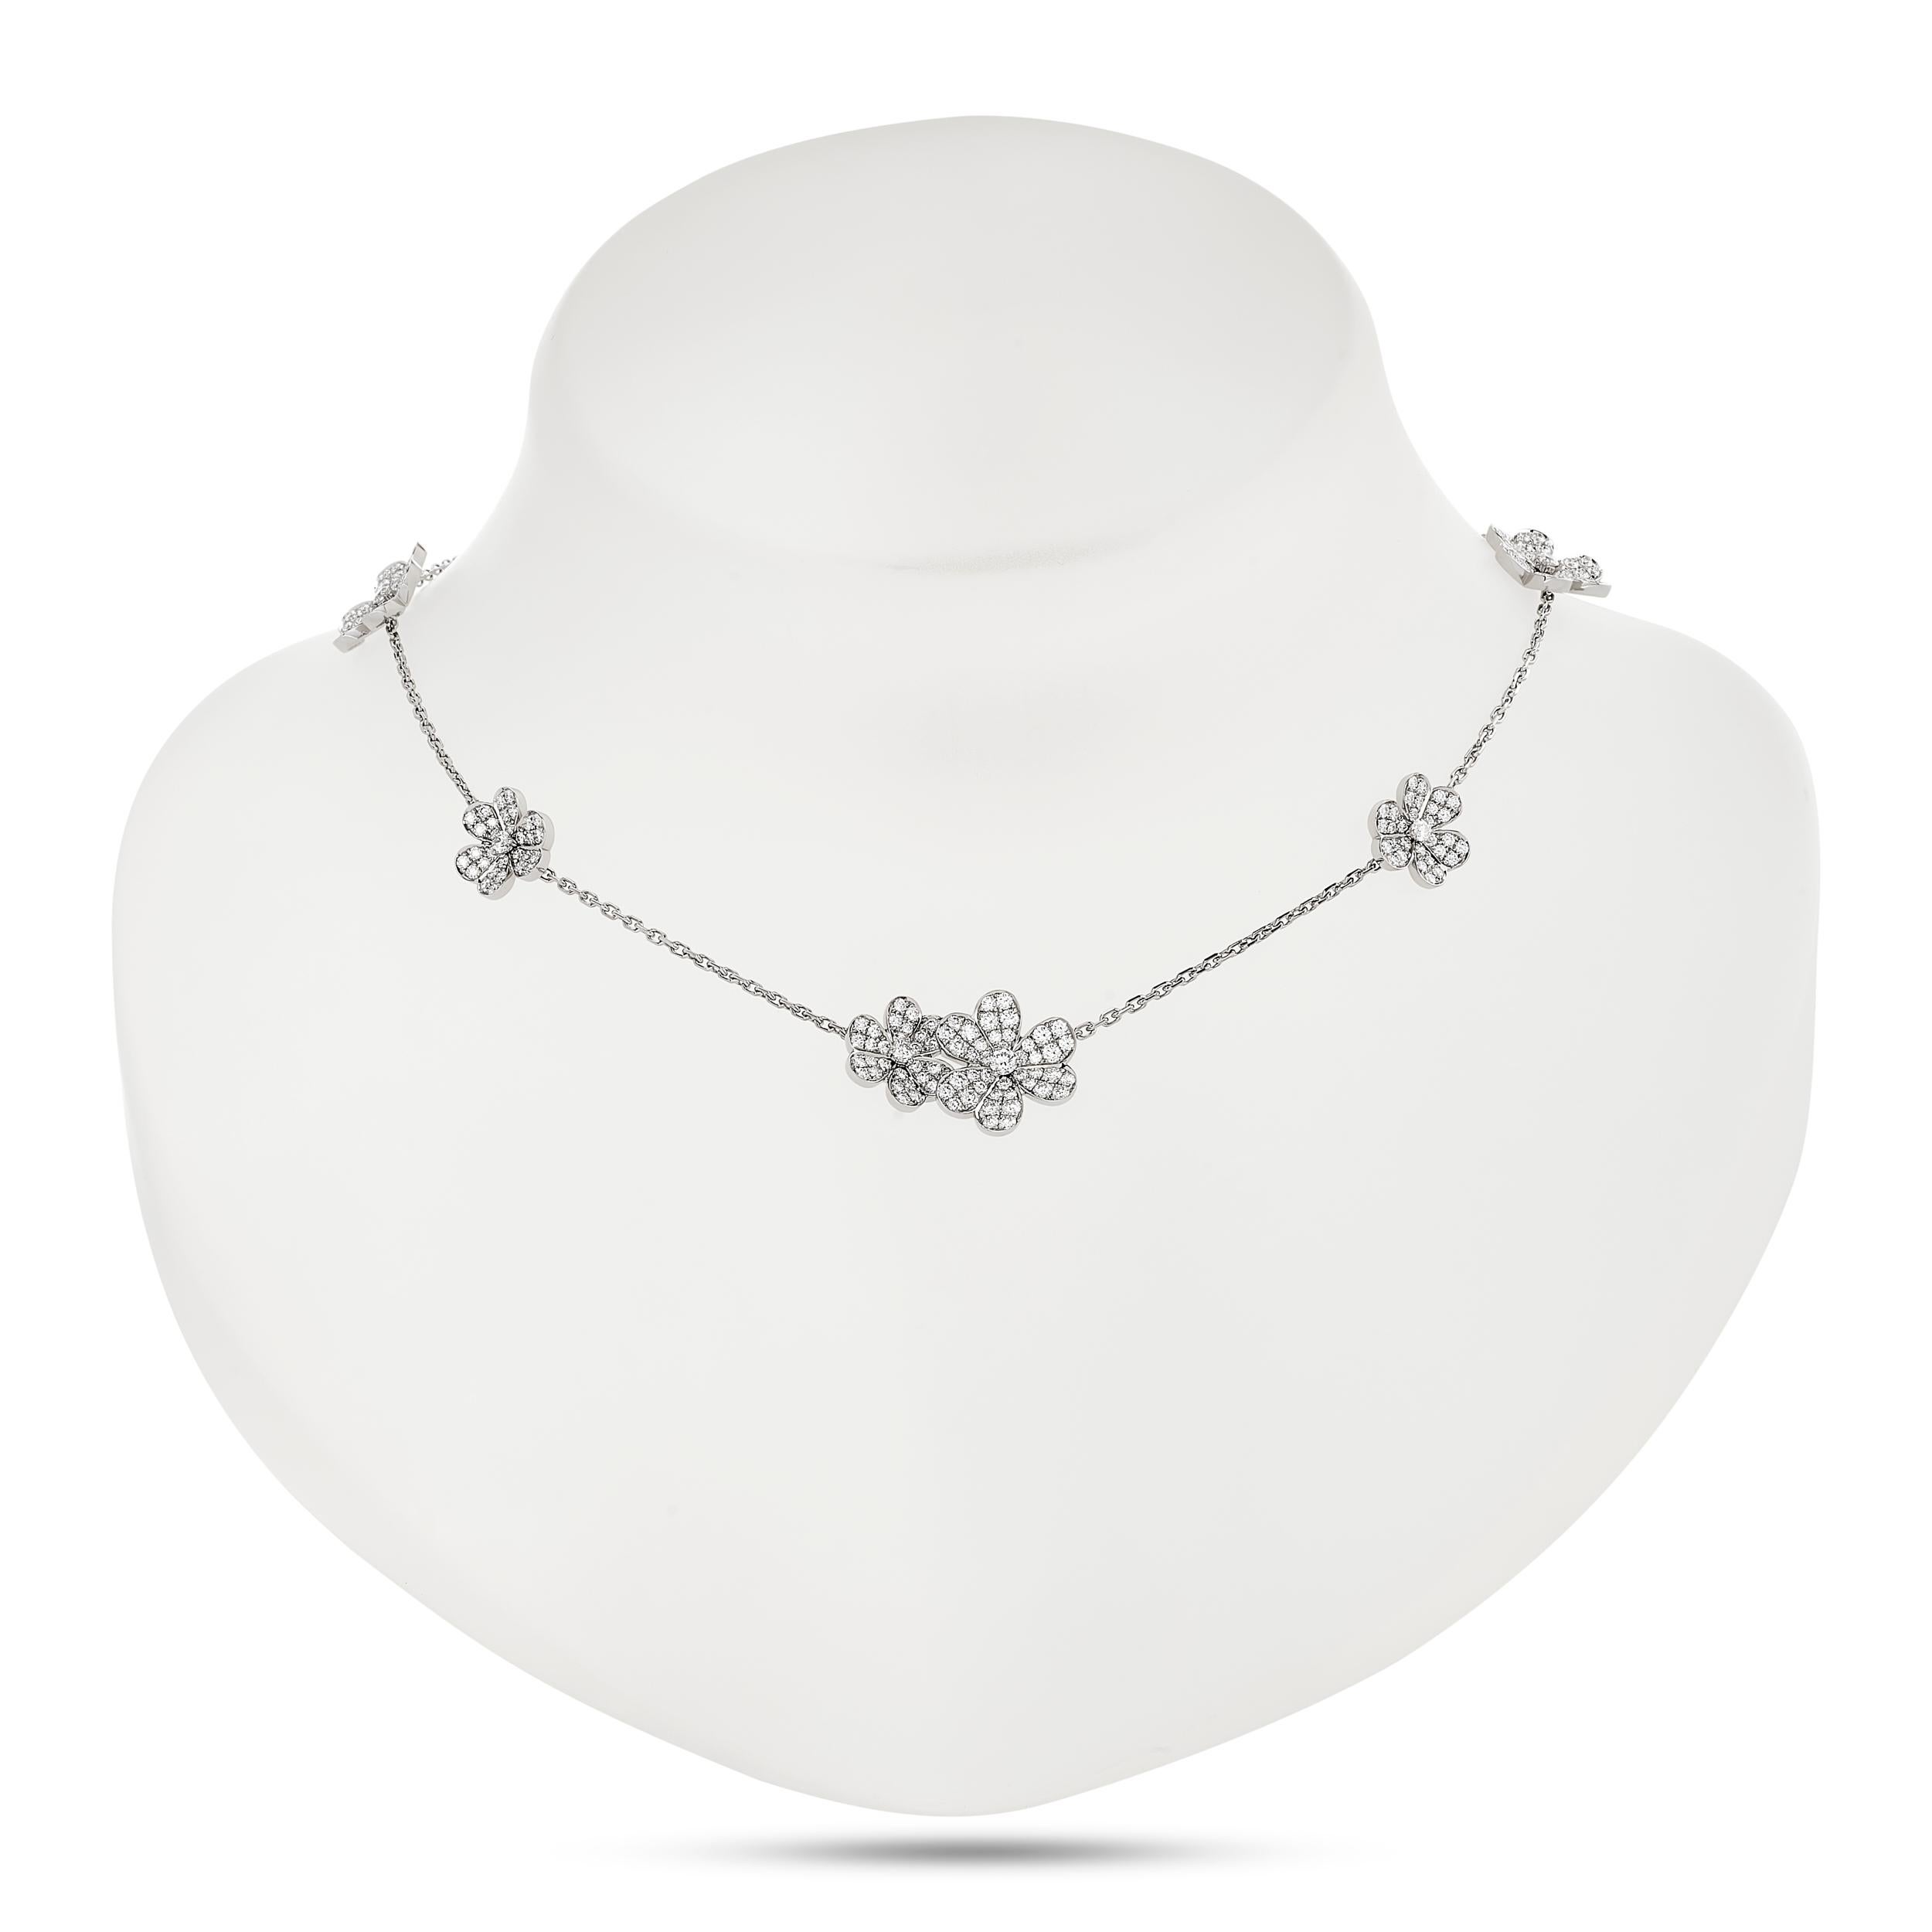 Captivating petals of luxury: Van Cleef & Arpels' diamond flower necklace, a masterpiece of elegance and grace.

This necklace has 9 diamond flower petals that have a total of 327 round brilliant cut diamonds that weigh approximately 5.12 carats;